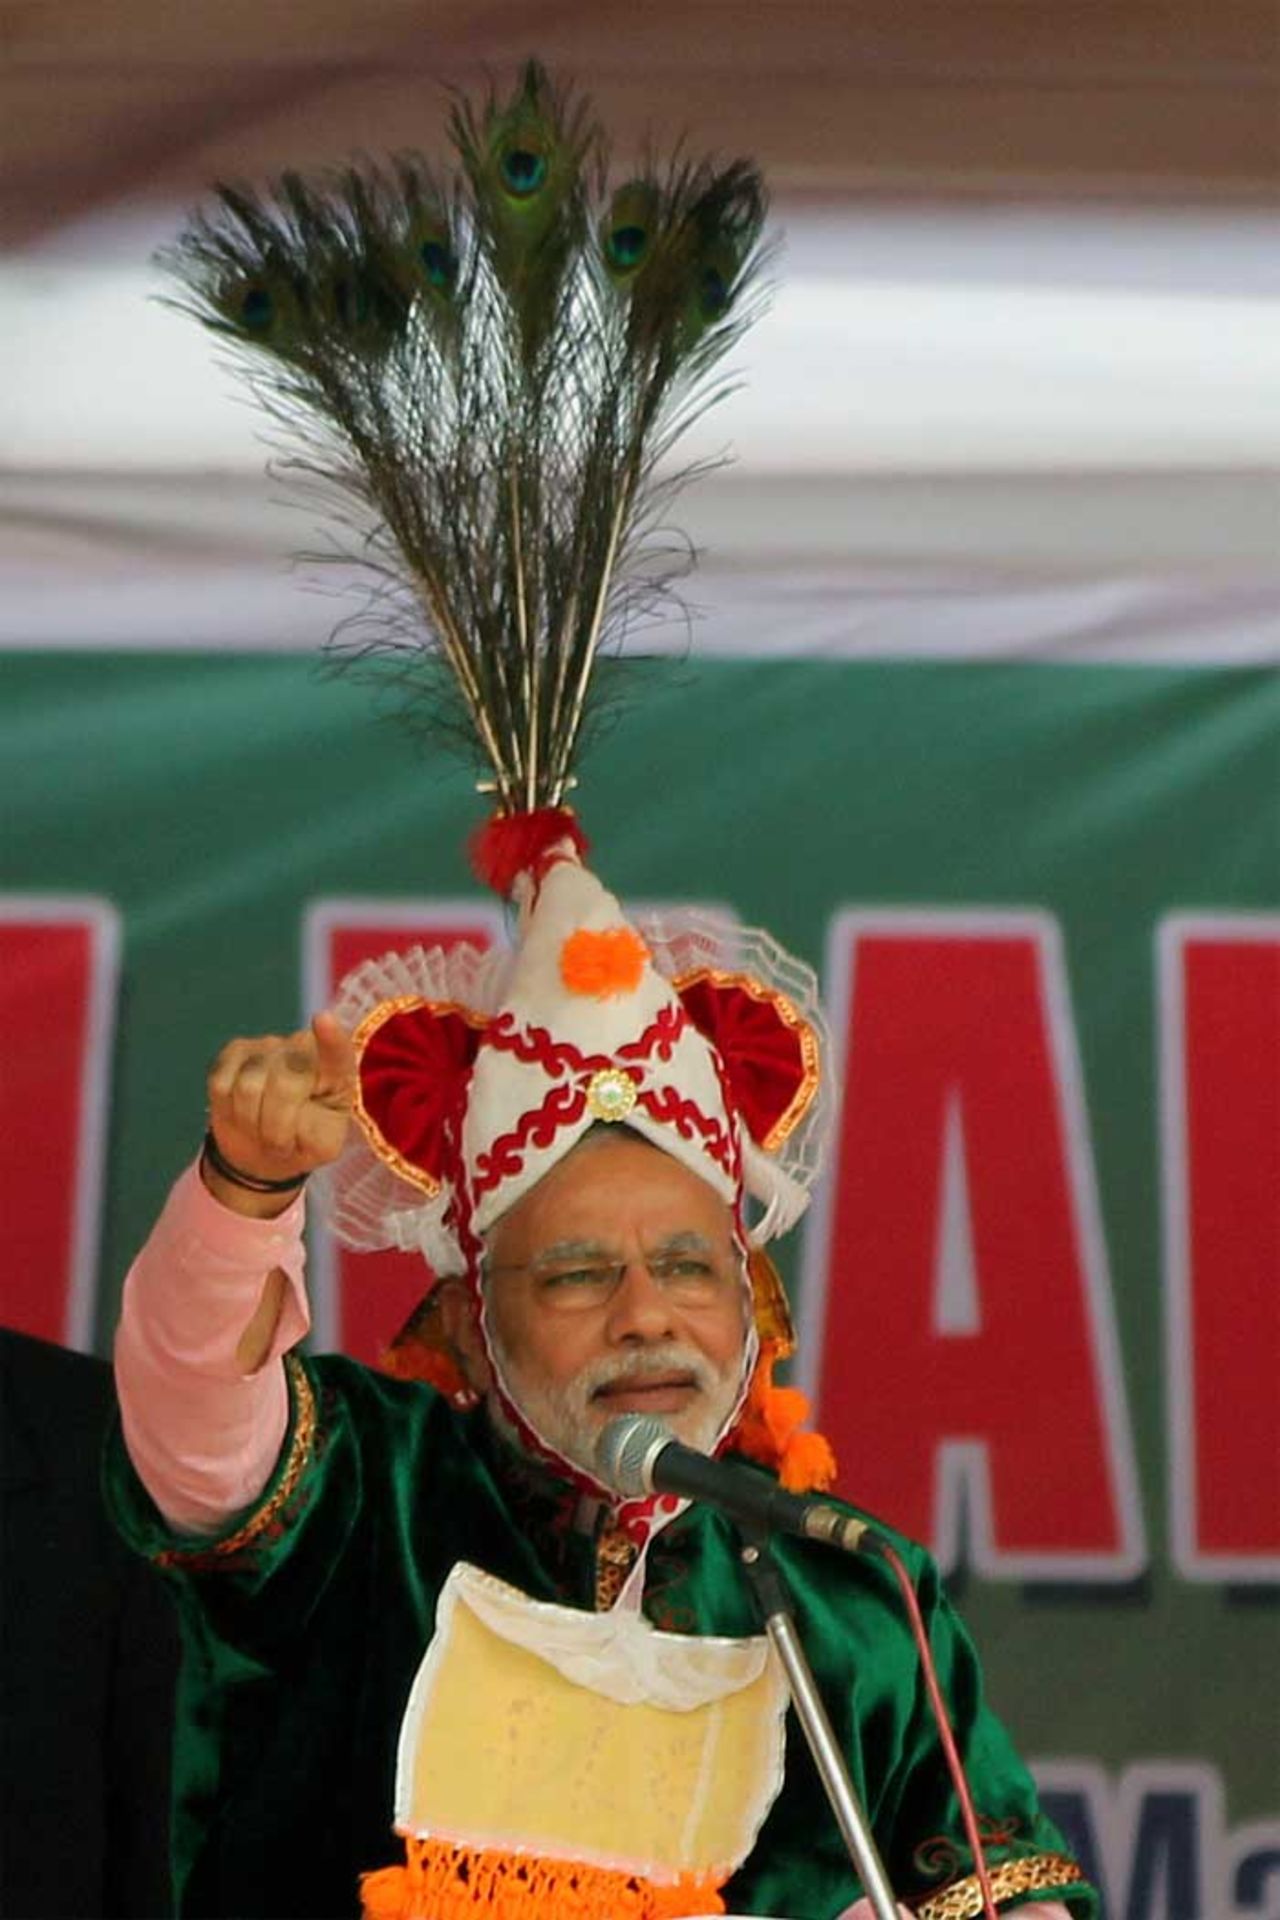 Seen here is another Manipuri headgear with peacock feathers usually worn by dancers who play the part of Lord Krishna, a Hindu God, in a traditional Manipuri dance. Modi wears it in Imphal, the state capital, during an election rally. 